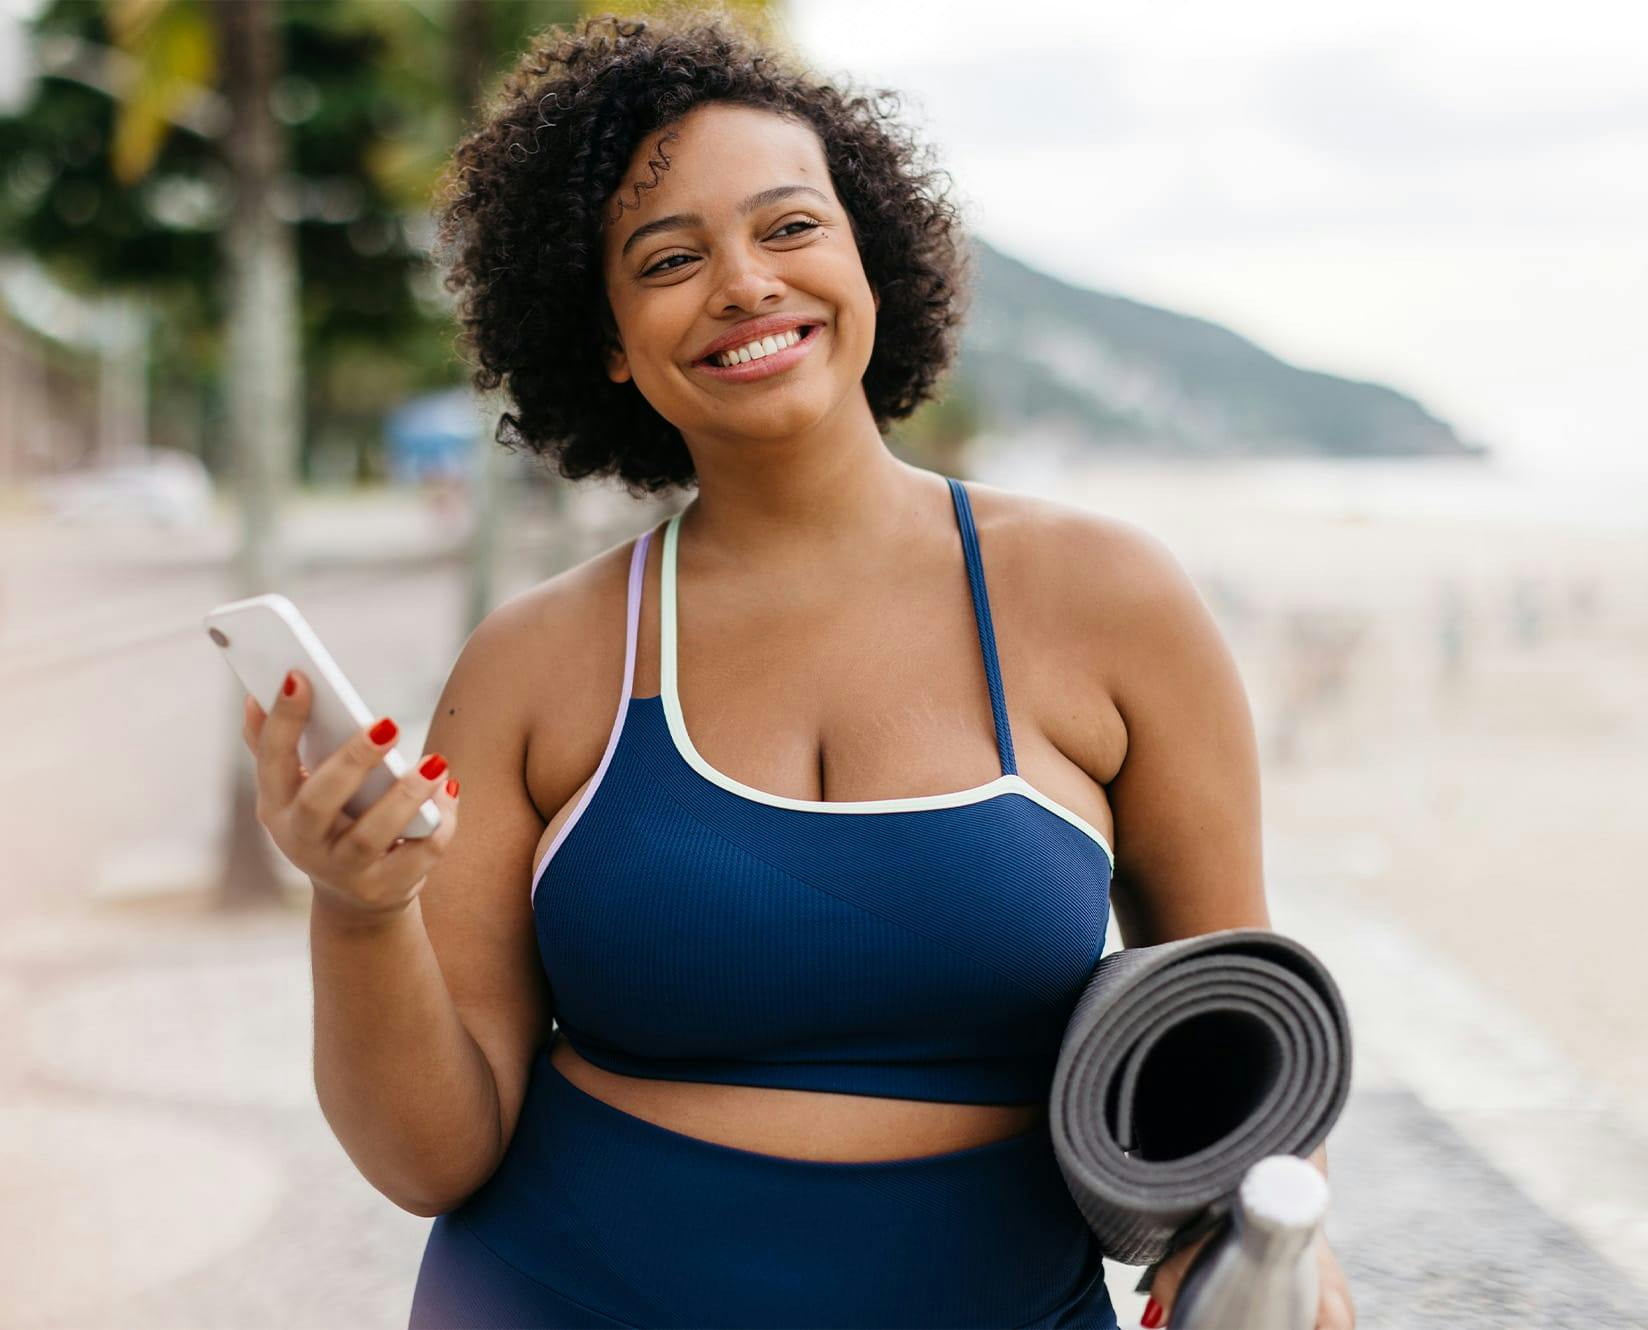 woman with yoga equipment and holding a phone walking on beach